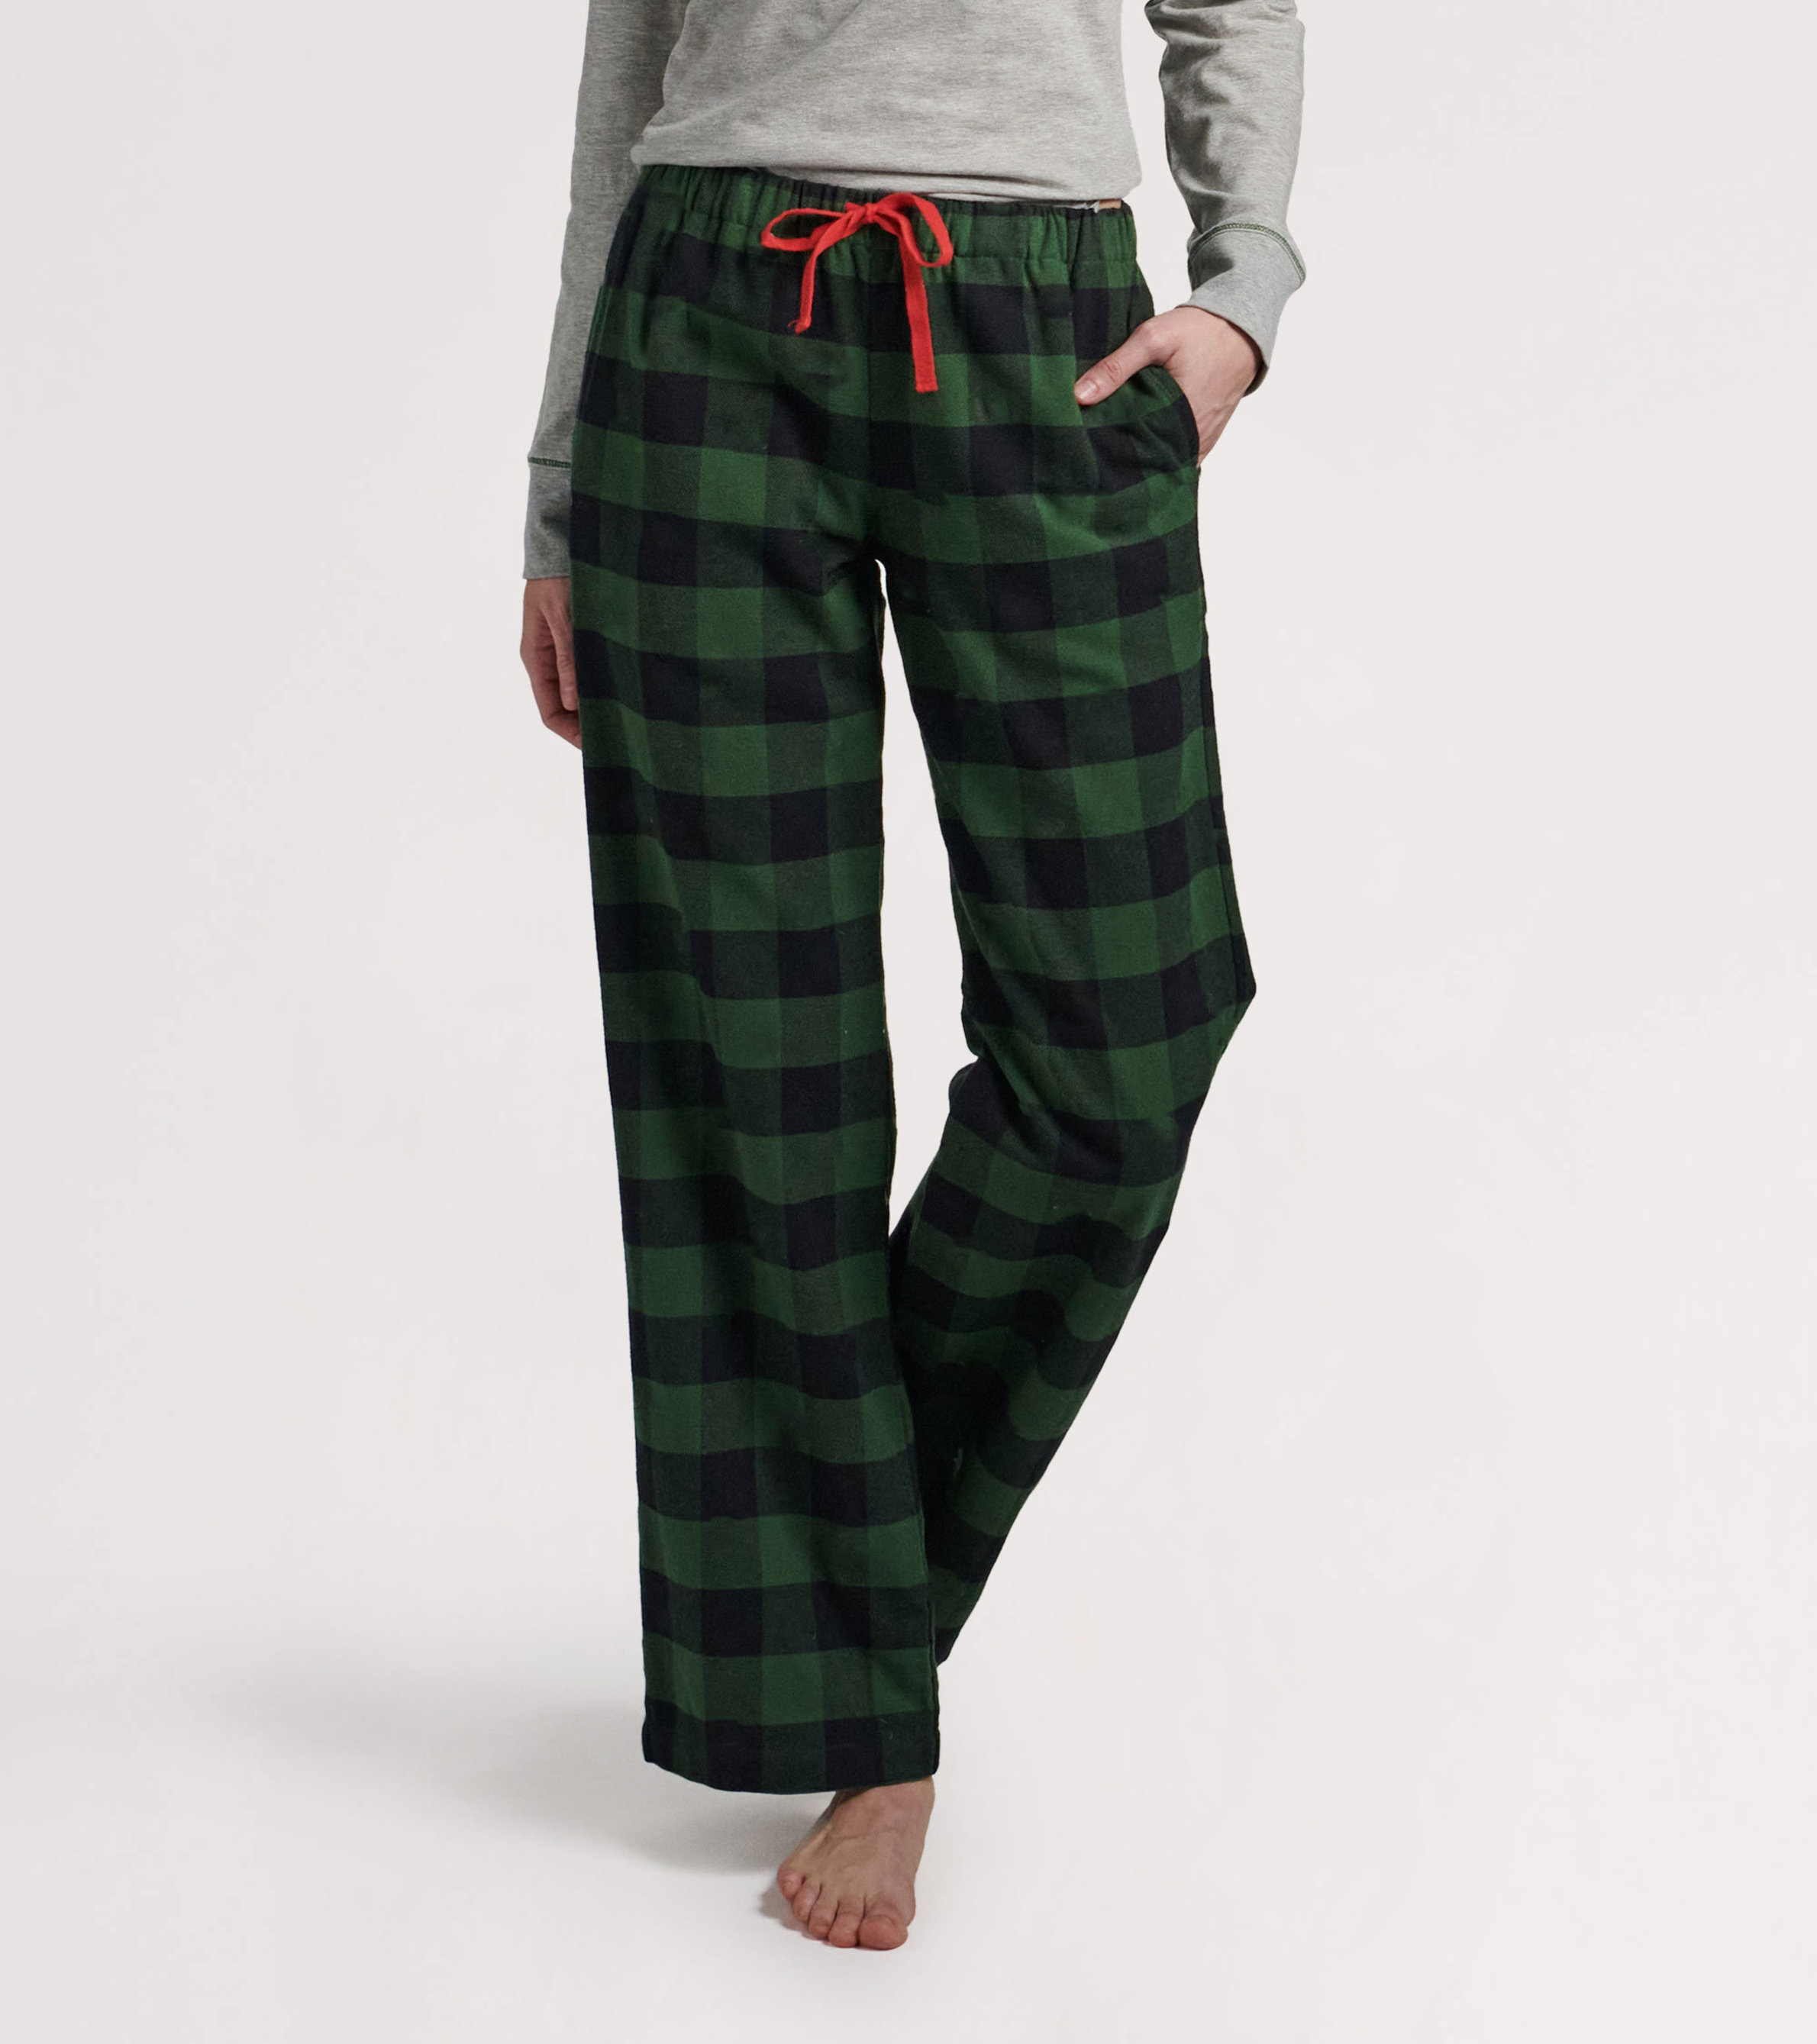 https://cdn.littlebluehouse.com/product_images/forest-green-plaid-womens-flannel-pajama-pants/PA8BFLO002_jpg/pdp_zoom.jpg?c=1664833964&locale=en